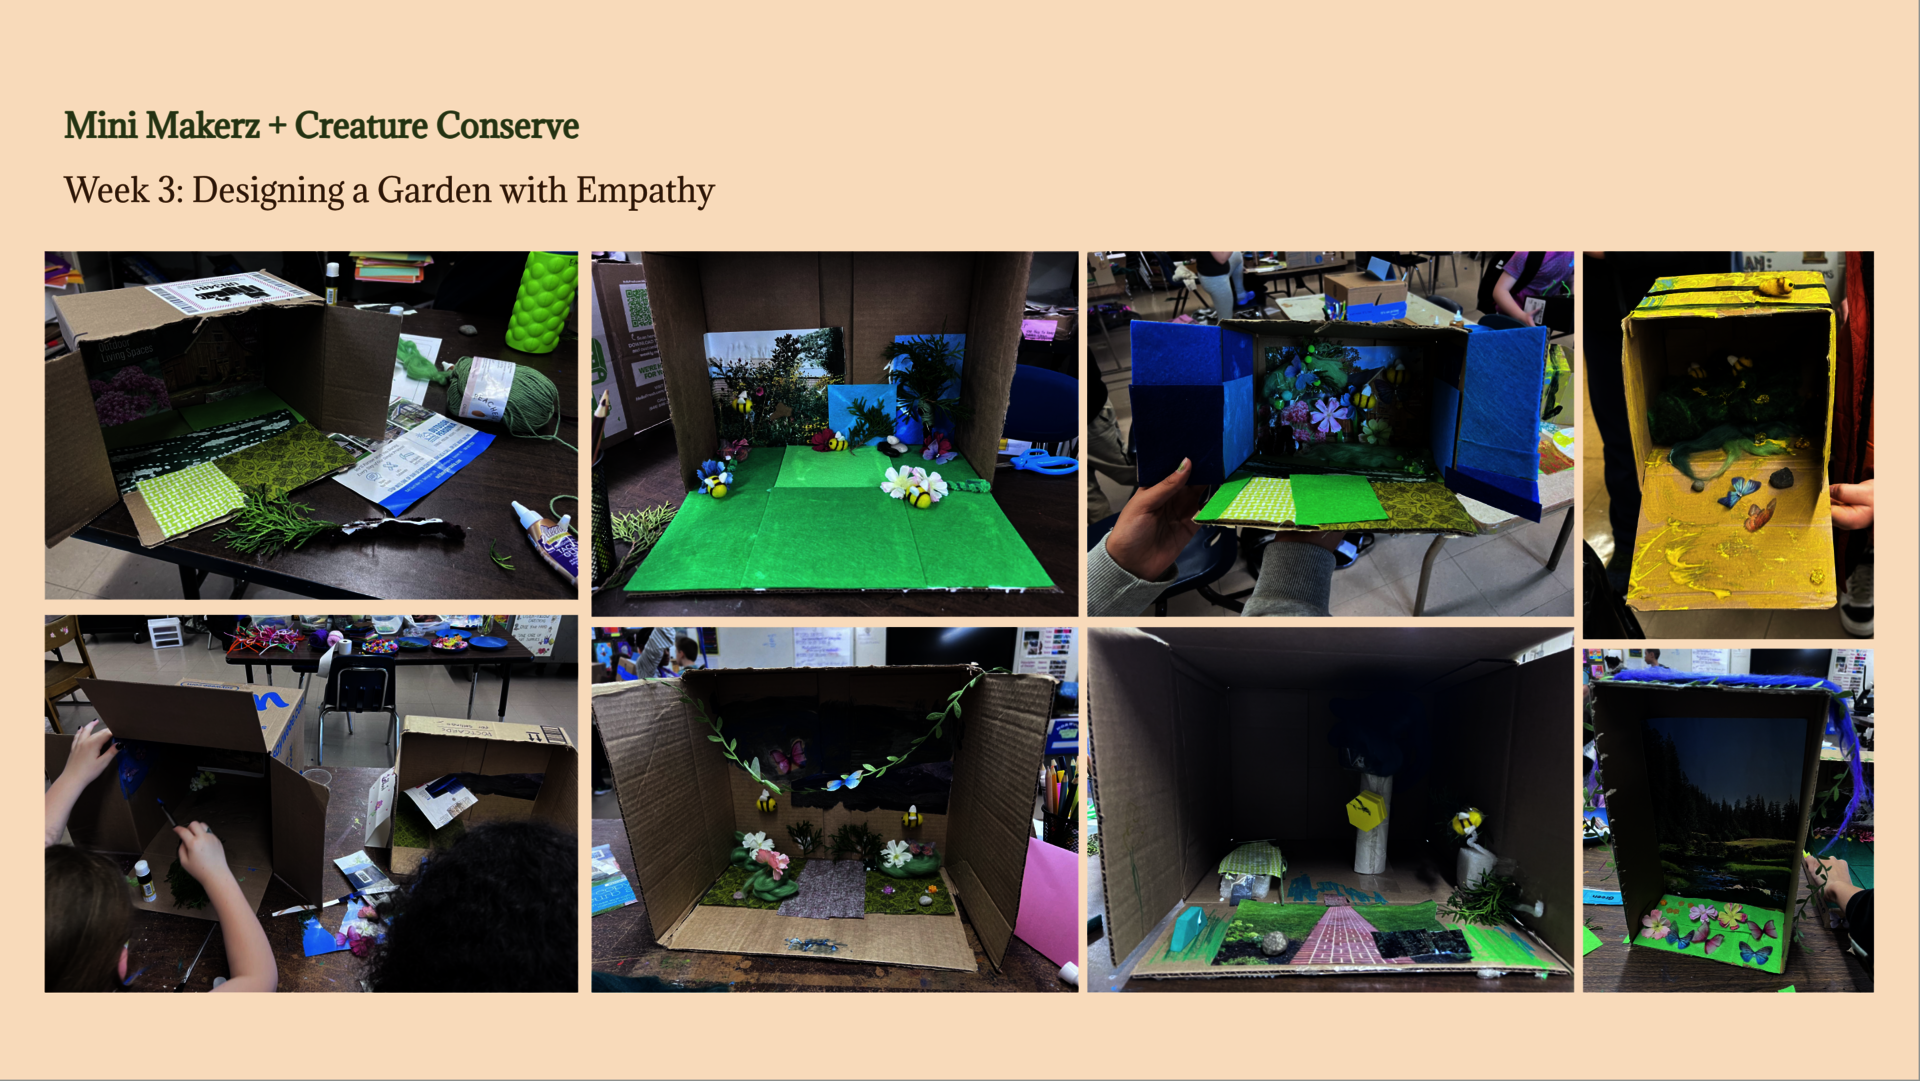 Collage: Student-made 3D dioramas depicting gardens for pollinators using found and reclaimed materials. Additional images show students engaged in the process of crafting their dioramas.